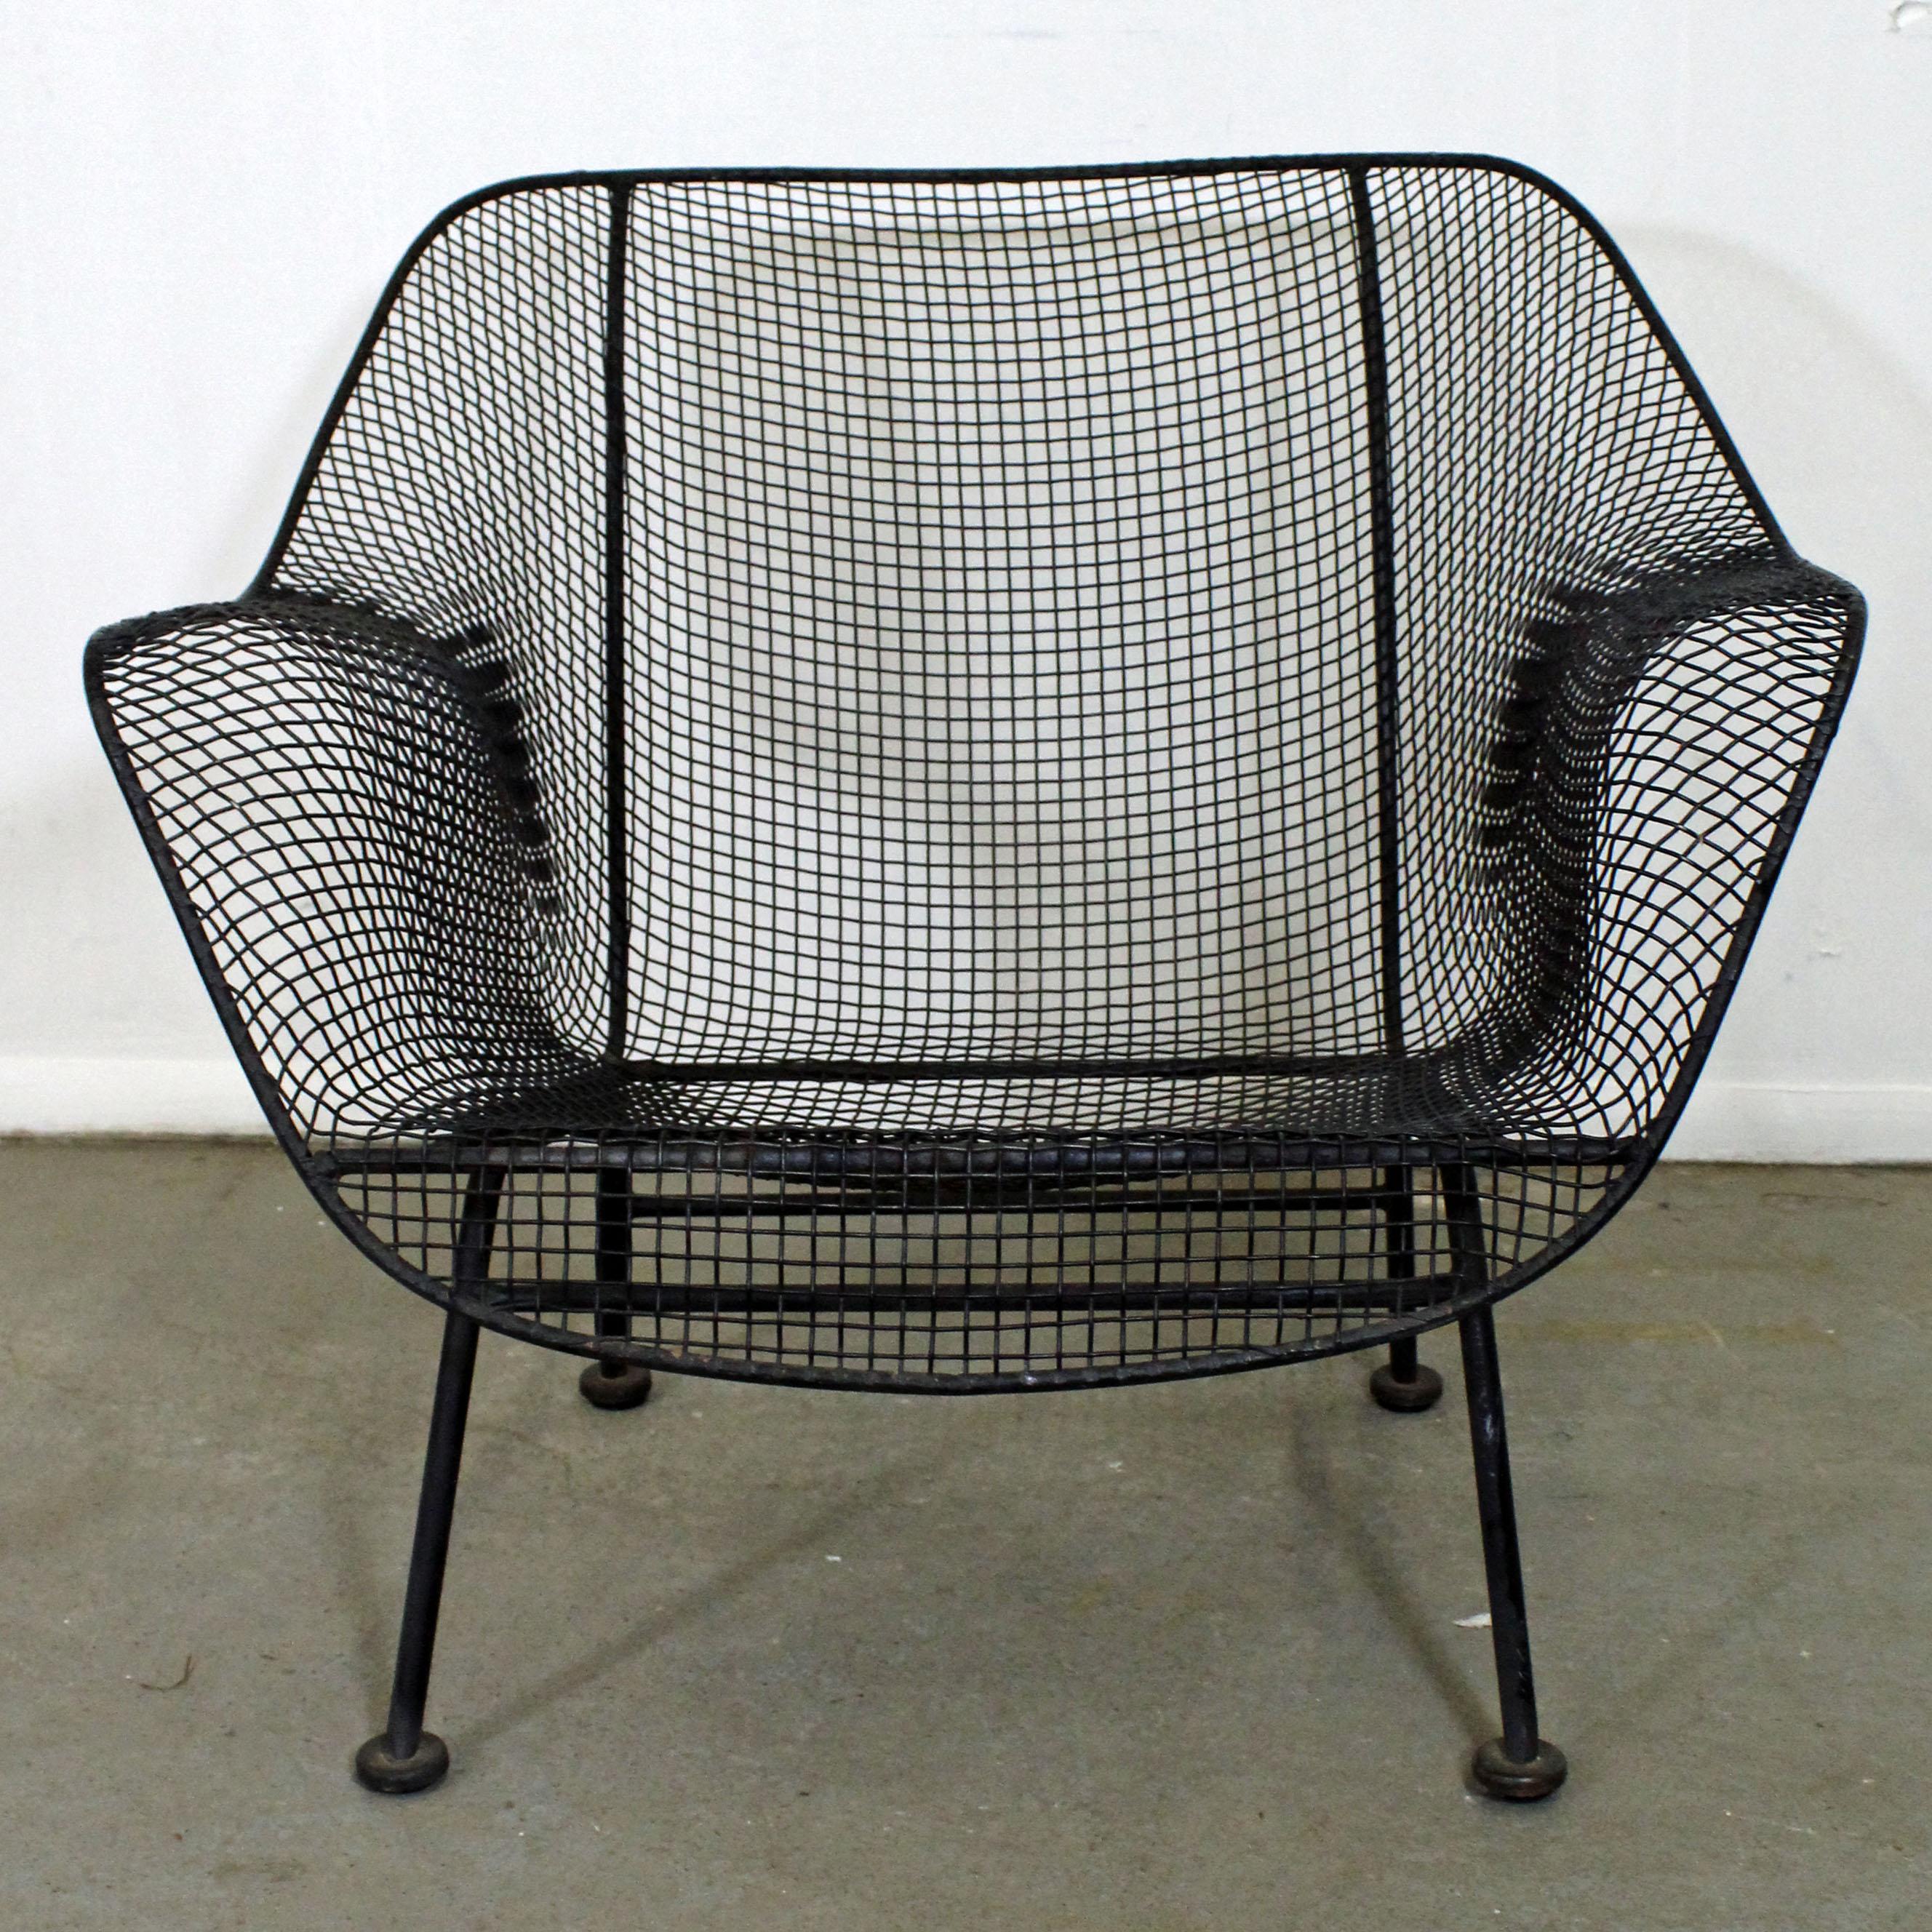 What a find. Offered is hard-to-find outdoor lounge chair made by Russell Woodard 'Sculptura'. It has a wrought iron frame with woven mesh steel seats to withstand all weather conditions. Also features a low-slung seat for outdoor lounging. It is in